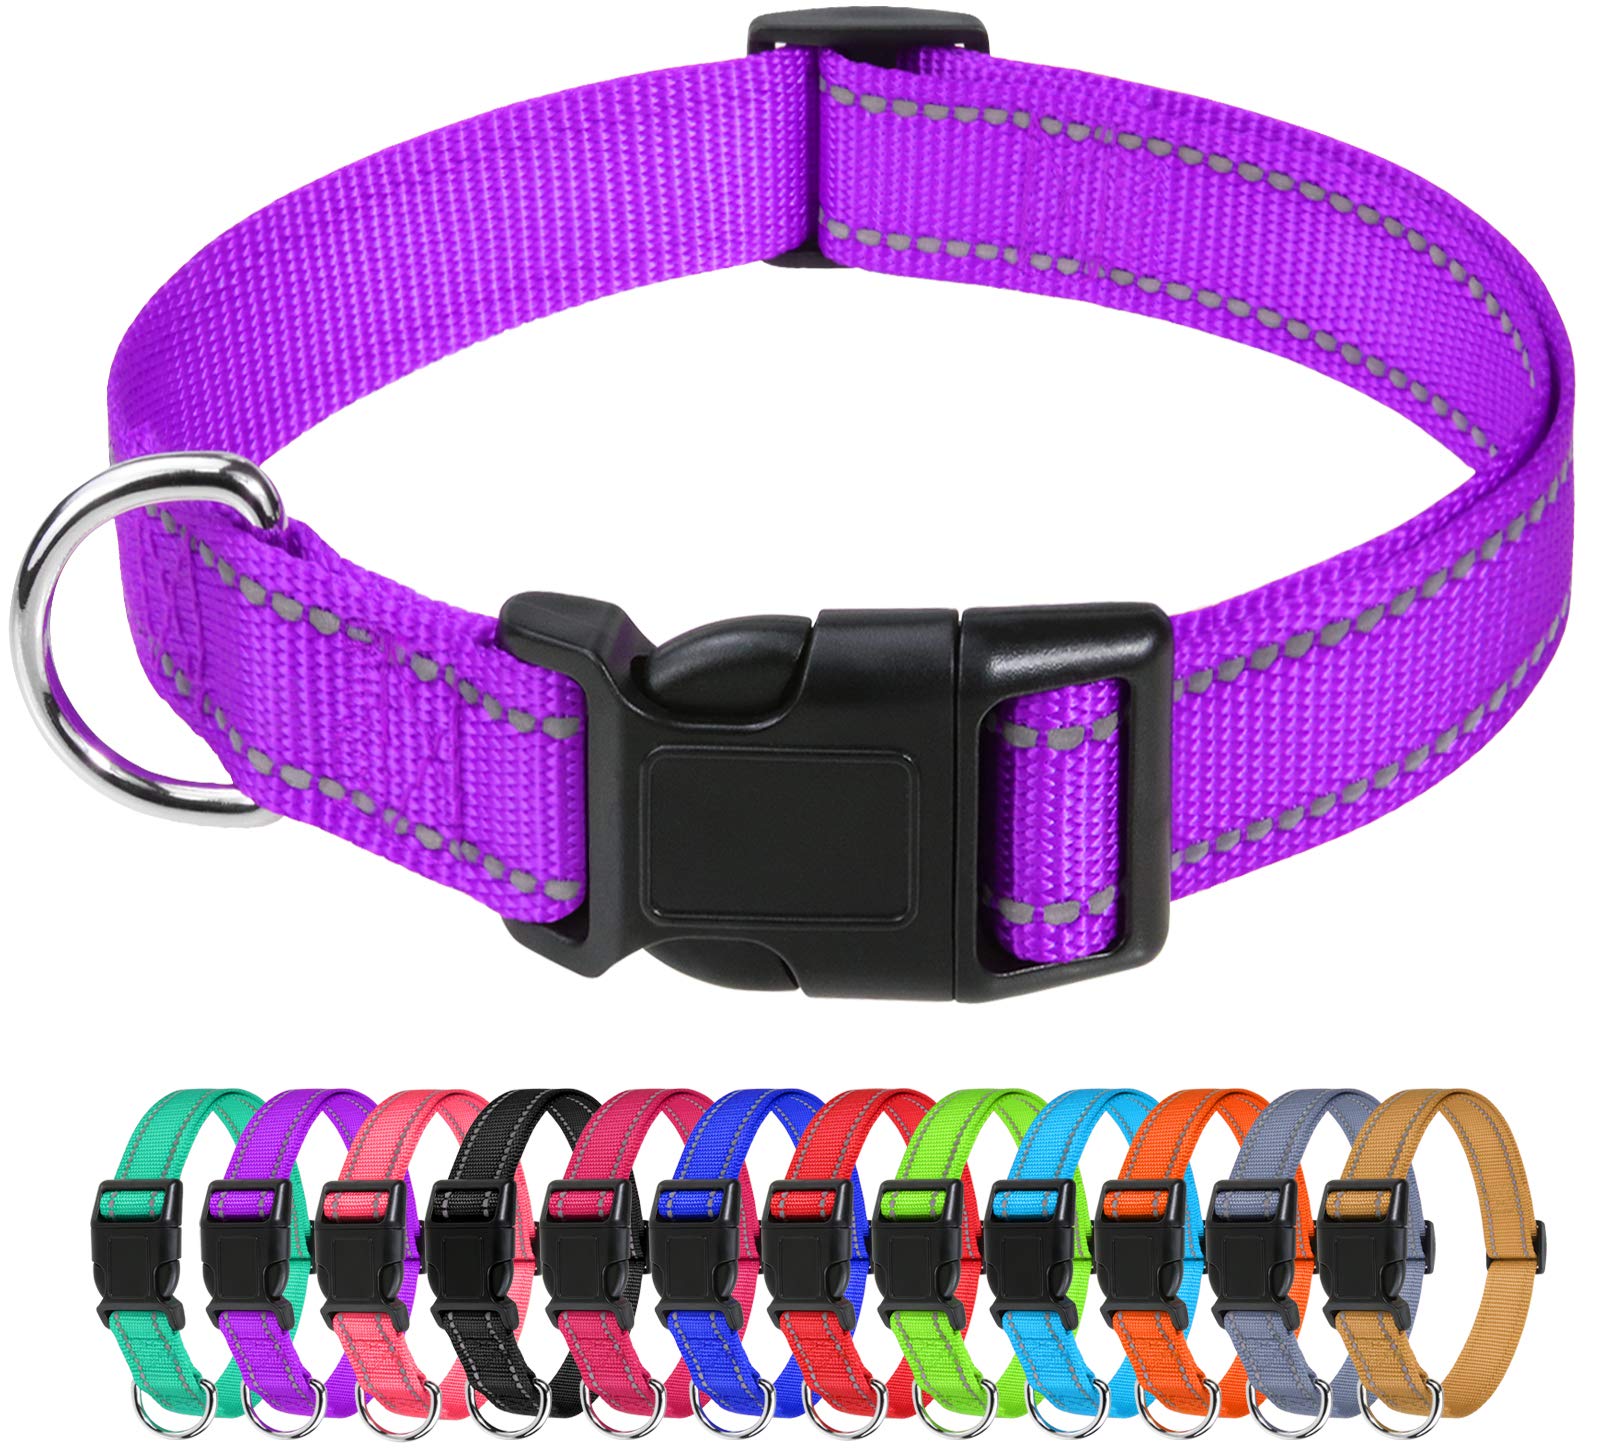 Tagme Reflective Nylon Dog Collars, Adjustable Classic Dog Collar With Quick Release Buckle For Small Dogs, 34 Width Purple